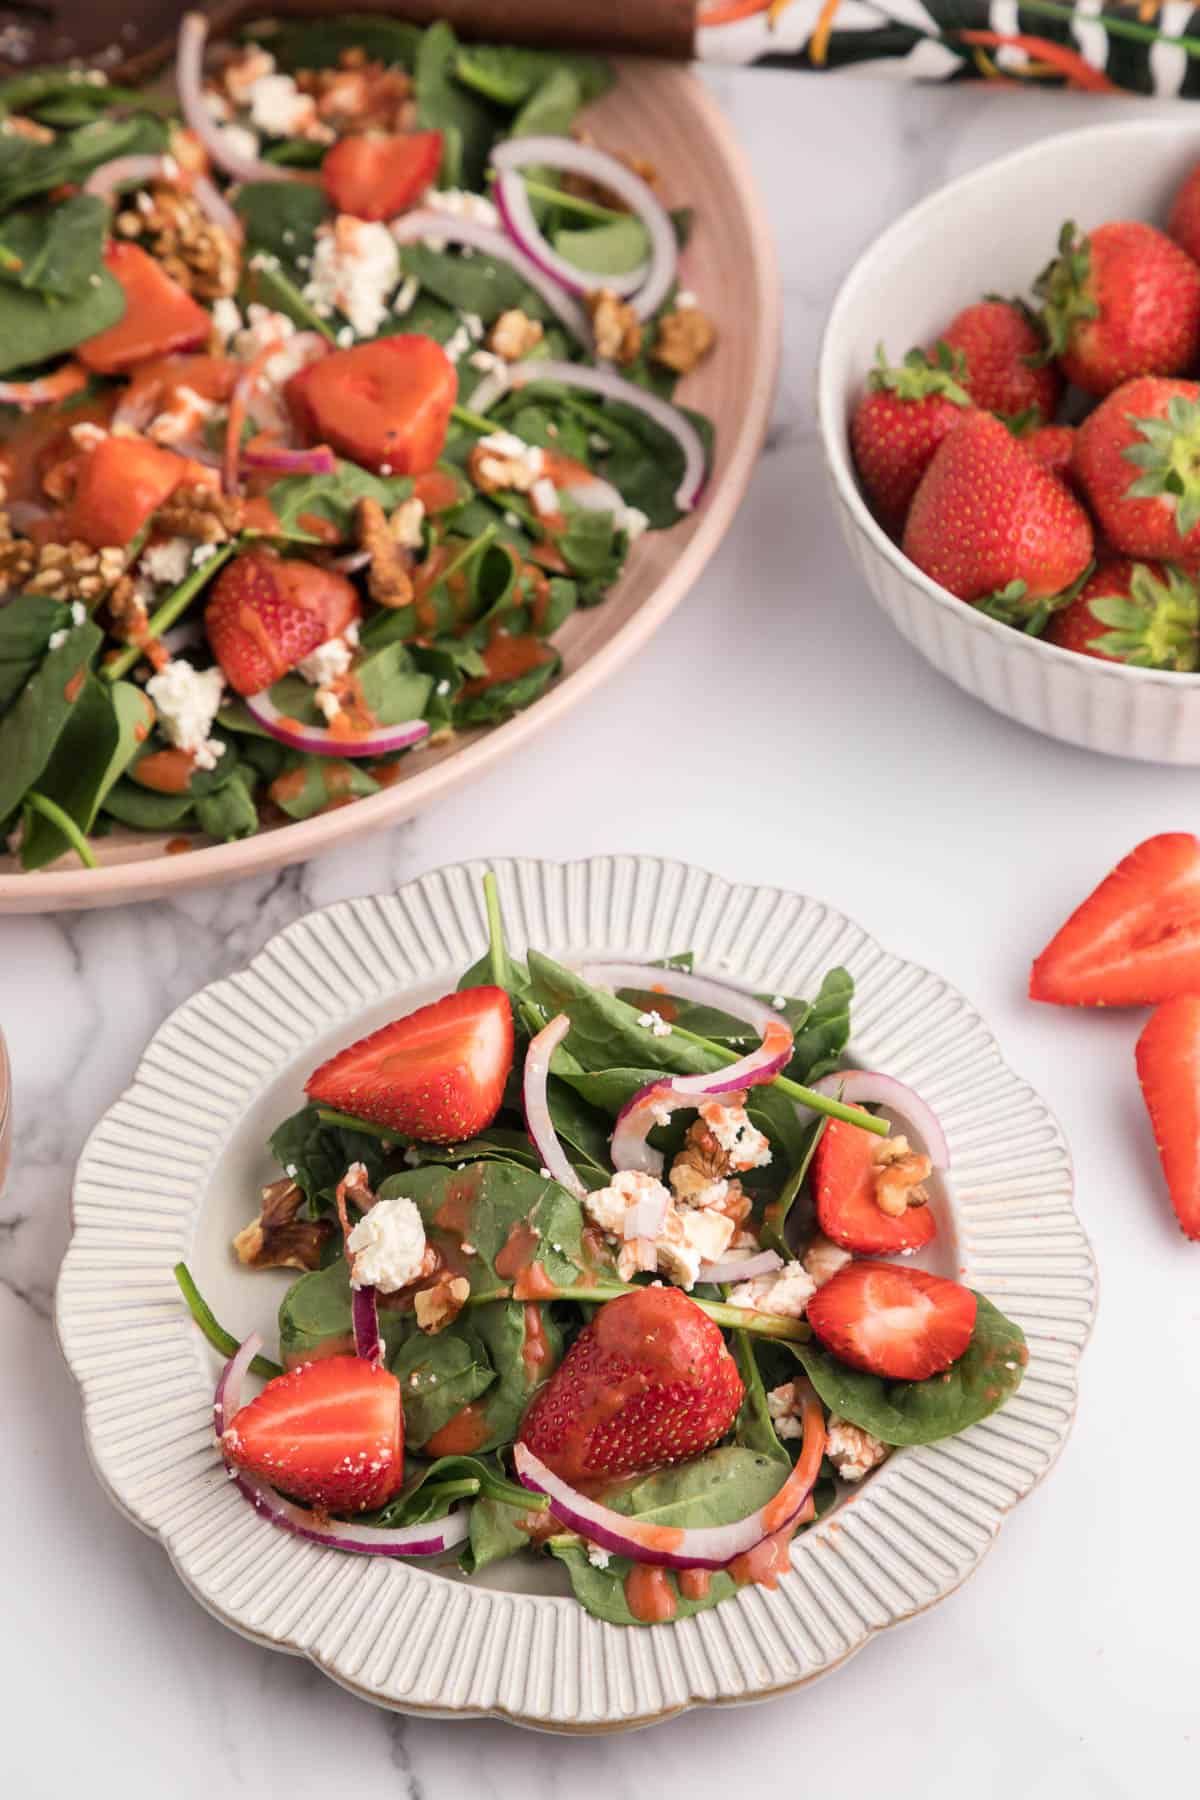 A serving on strawberry salad on a small white plate with a bigger plate of more salad and a bowl of strawberries in the background.